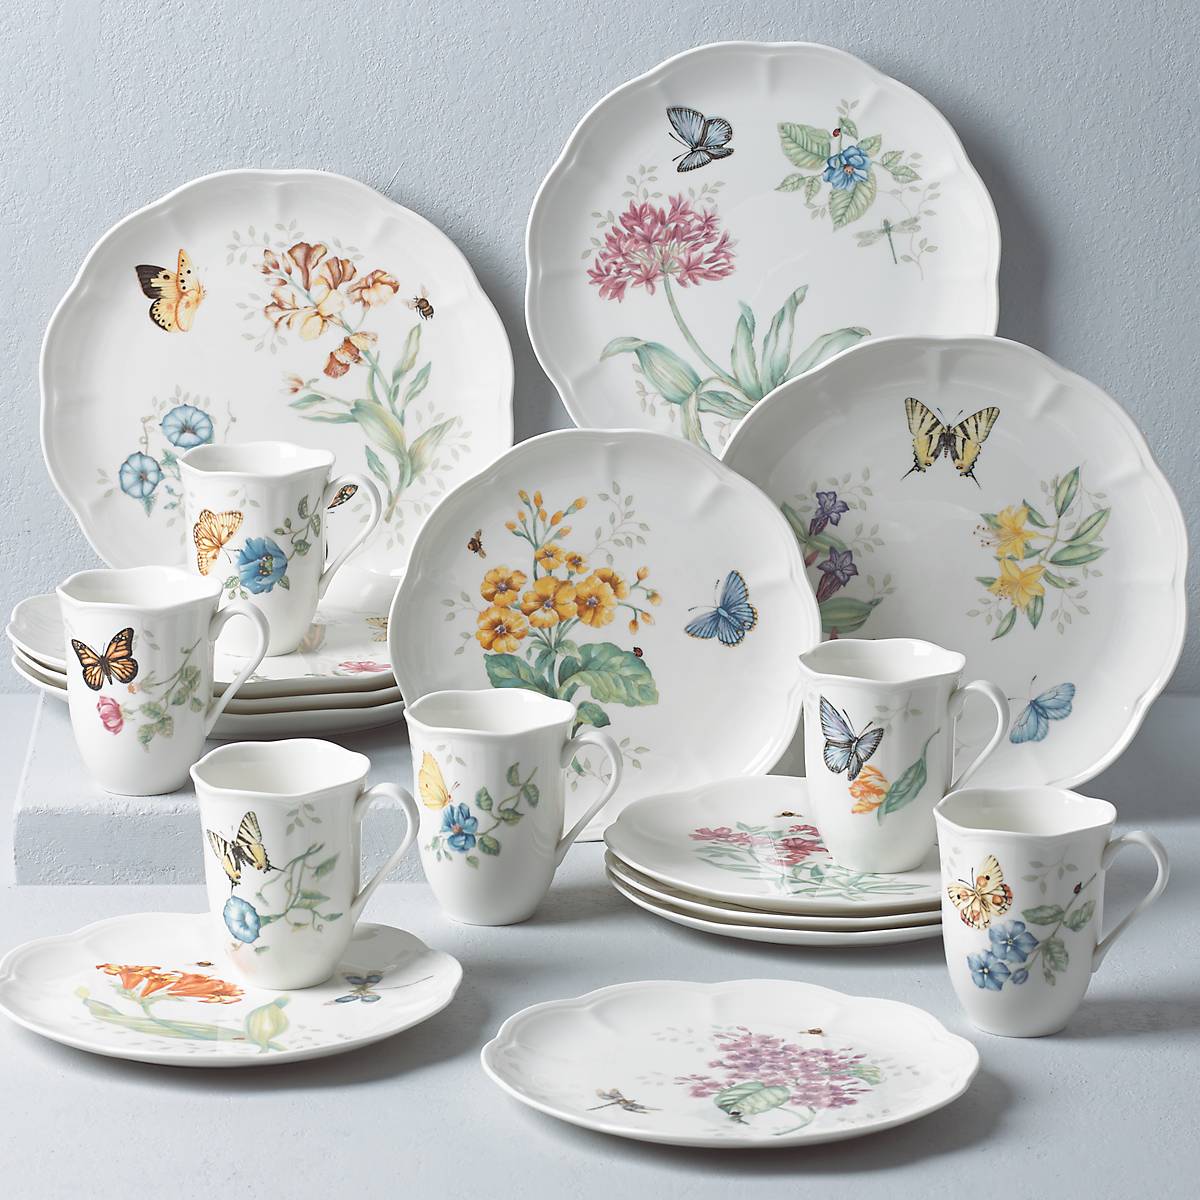 Sale: Lenox ~ Butterfly Meadow ~ Dinnerware ~ Vines Rice Bowl, Set 4, Price  $59.95 in Peckville, PA from Live With It by Lora Hobbs